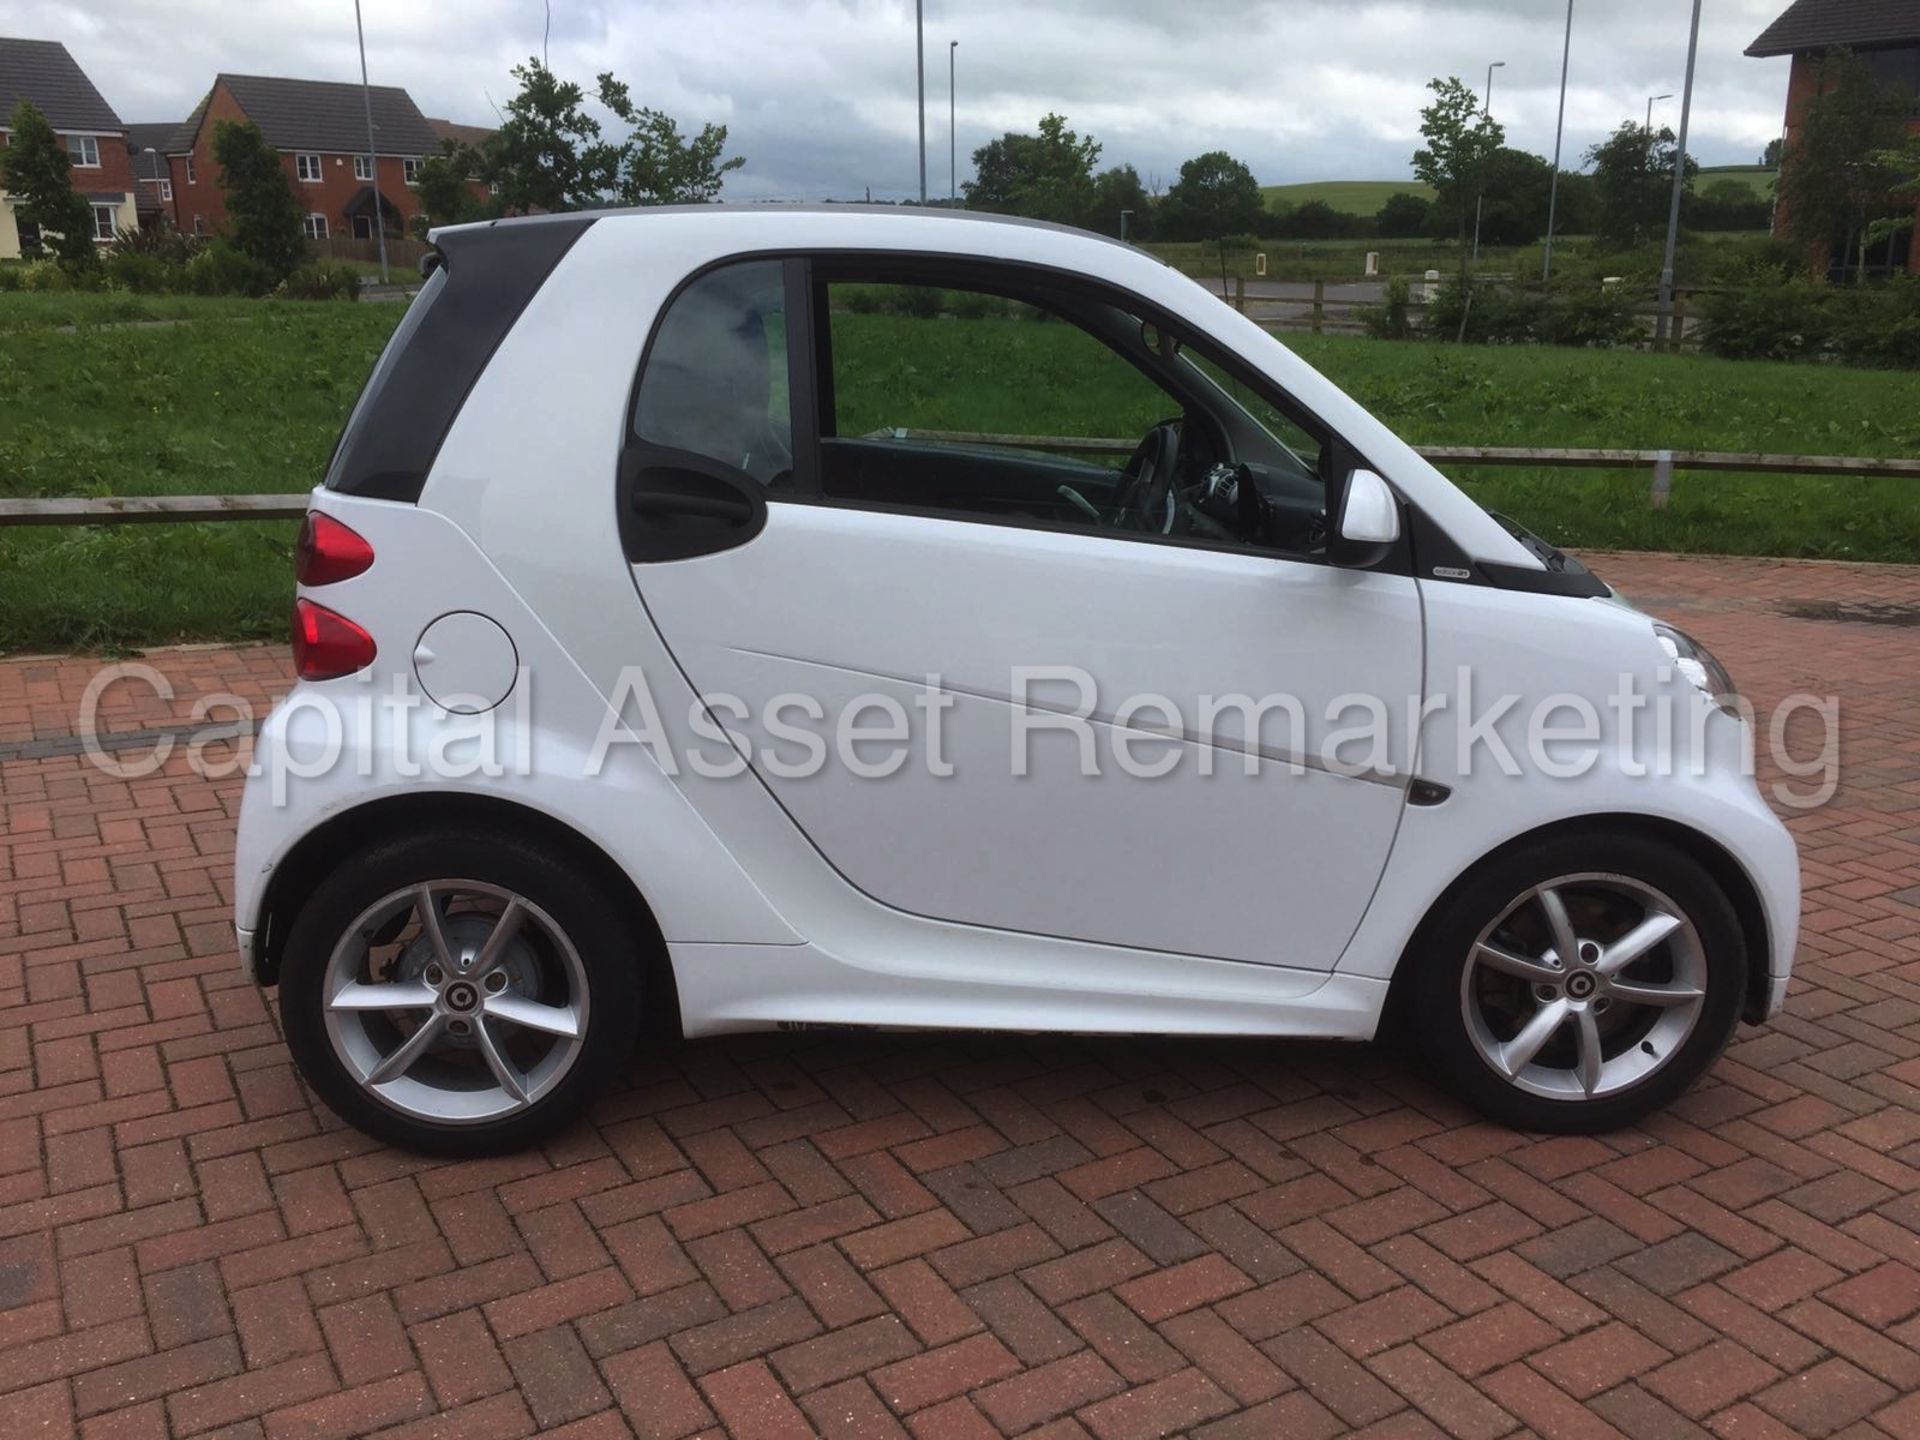 SMART FORTWO 1.0 PETROL "MHD" AUTO - 14 REG - 1 OWNER - AIR CON - ELEC PACK - GREAT SPEC - WOW!!! - Image 8 of 16